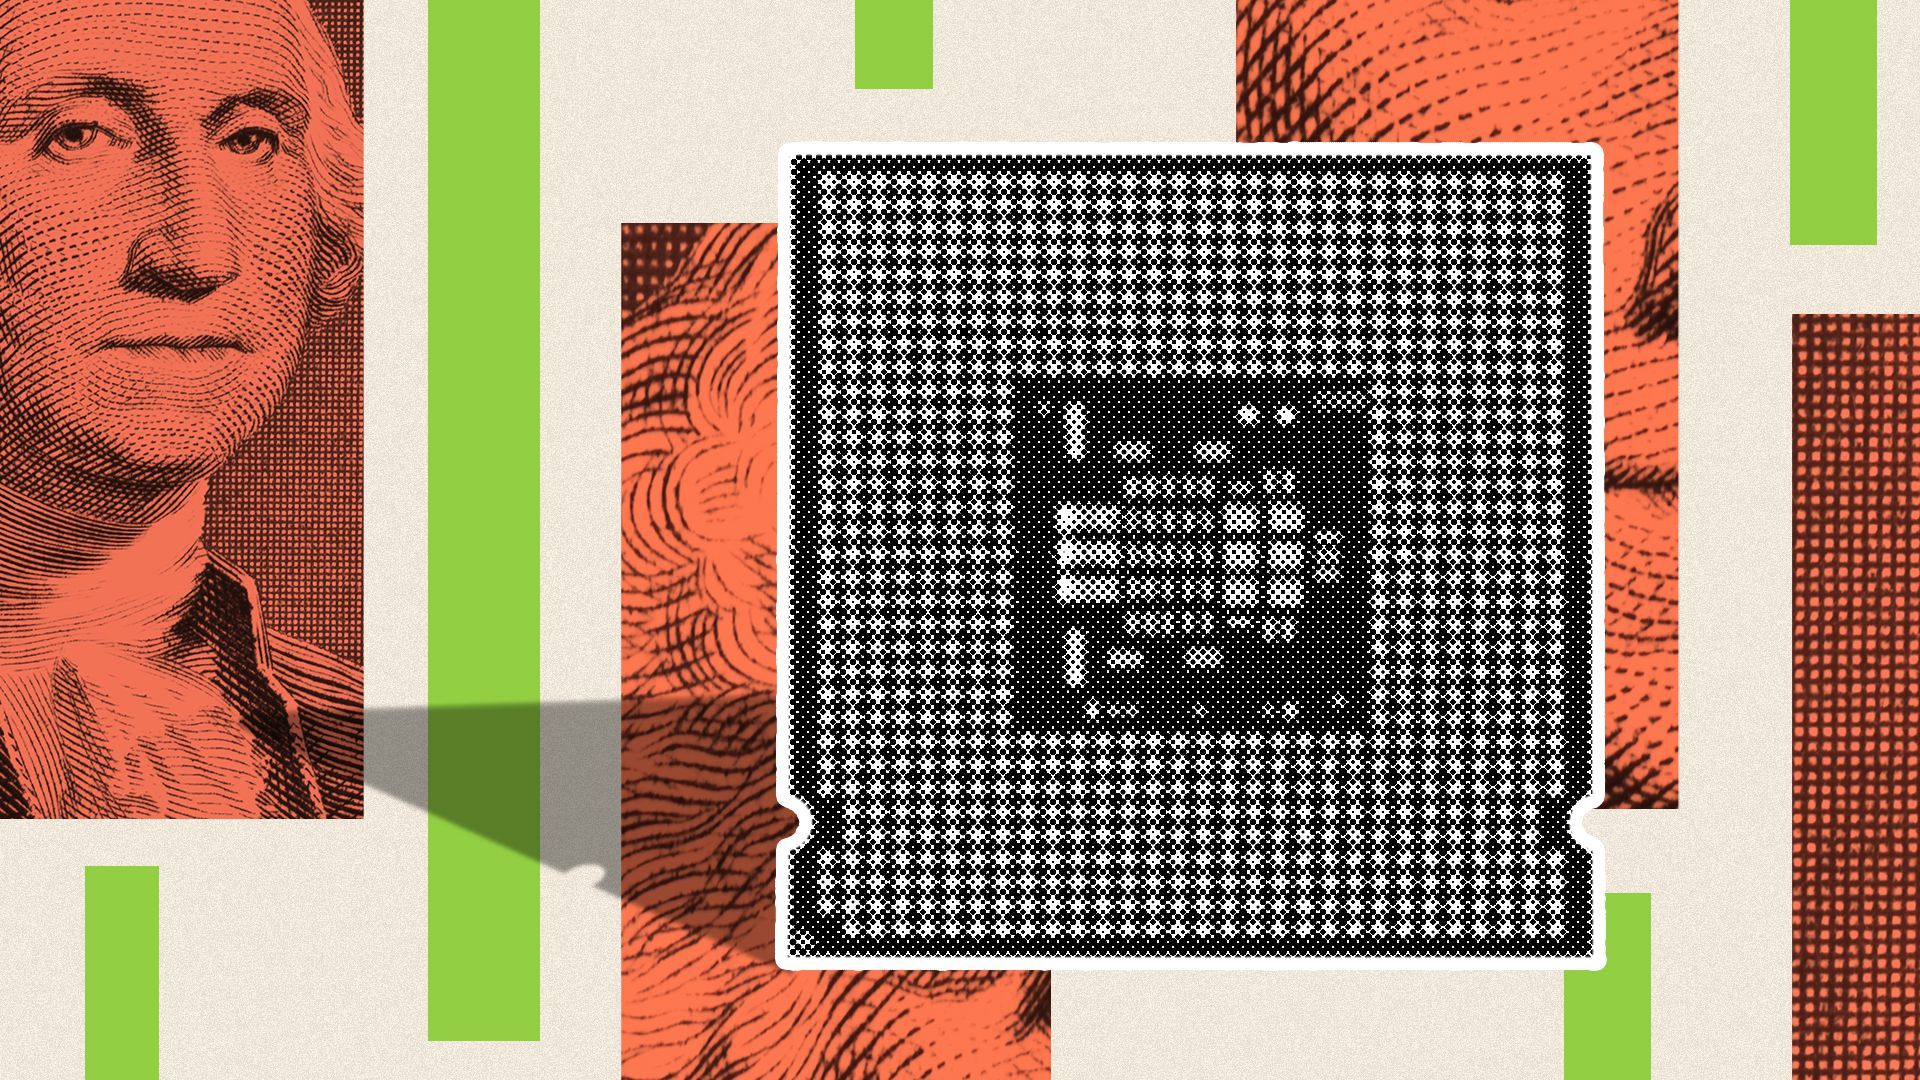 Illustration collage of a computer chip set amongst graphic shapes and close-up crops of a one dollar bill